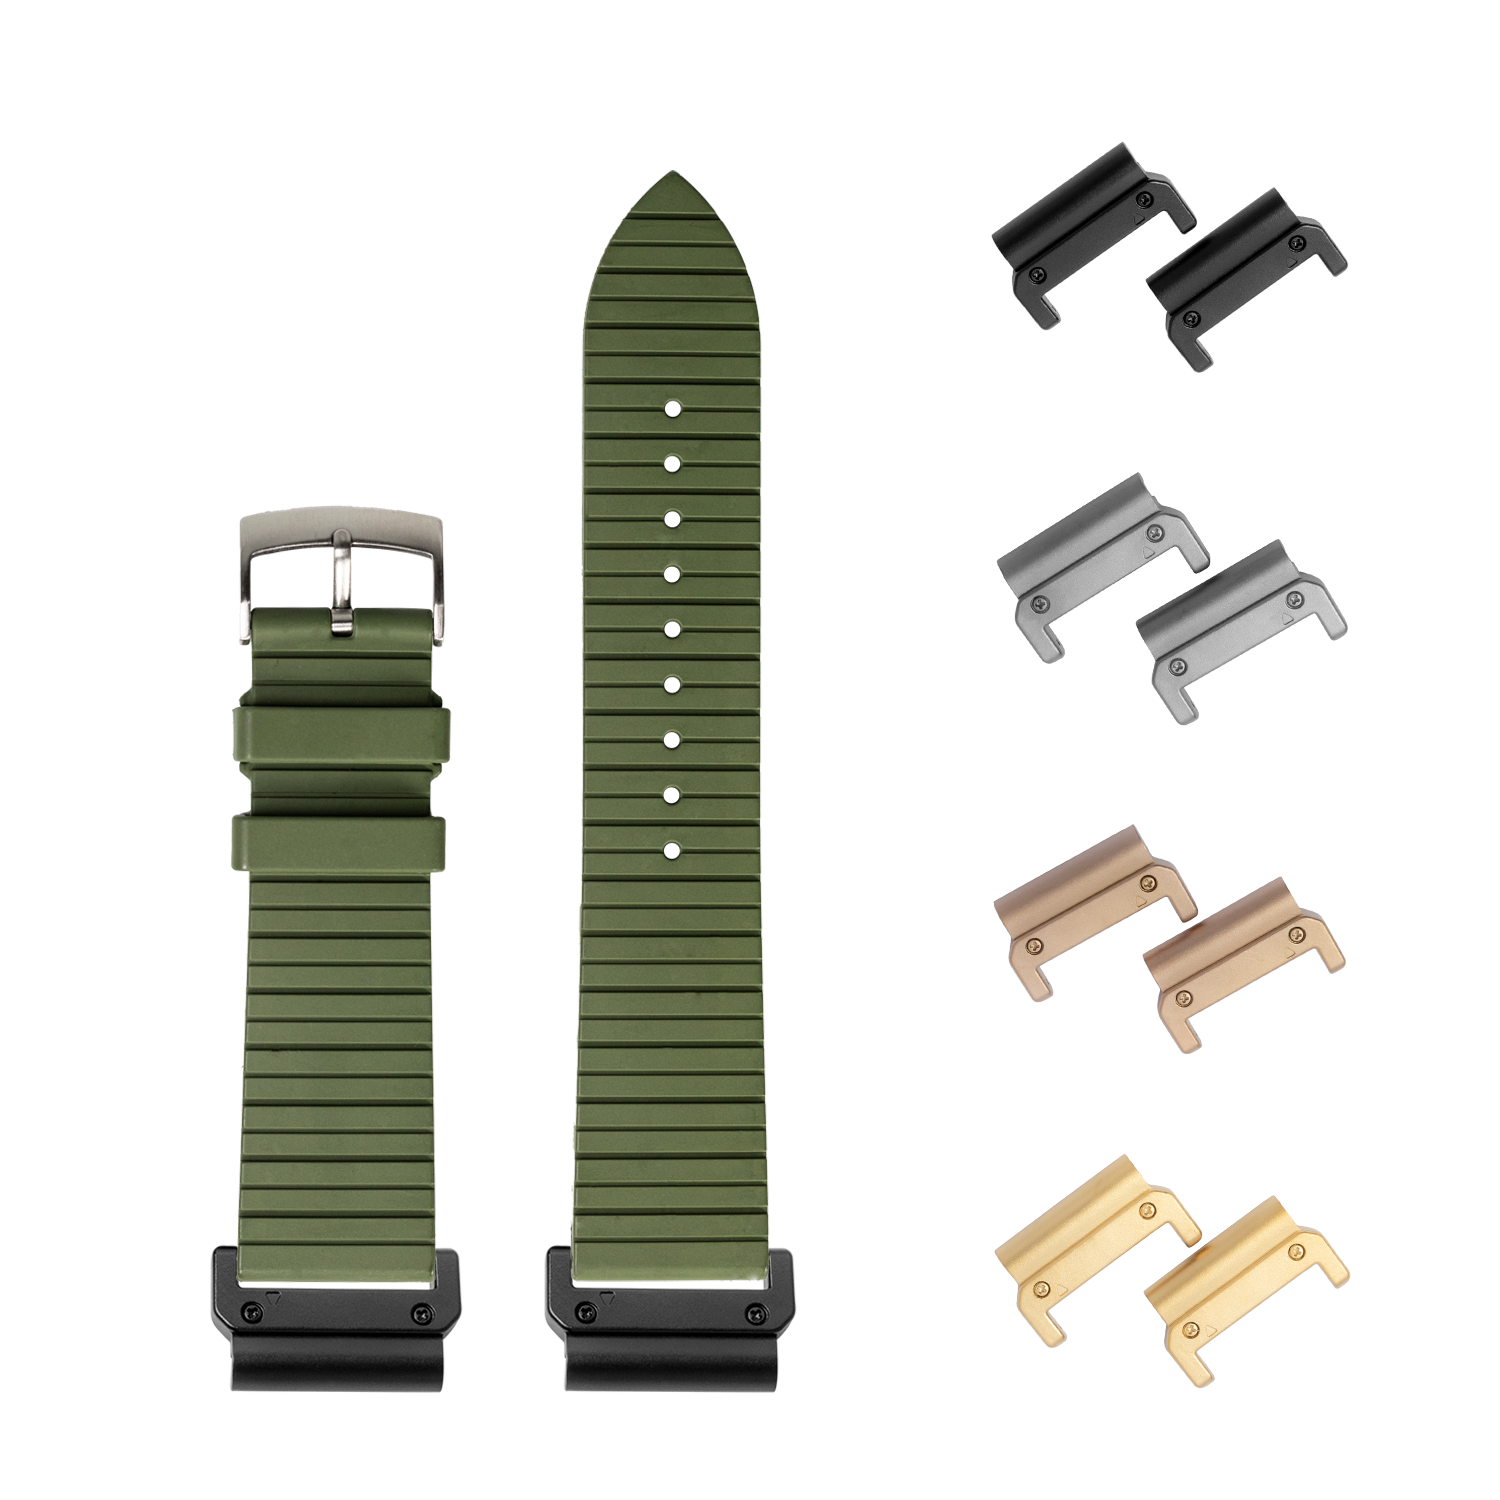 [QuickFit] King Panelarc FKM Rubber - Army Green 26mm